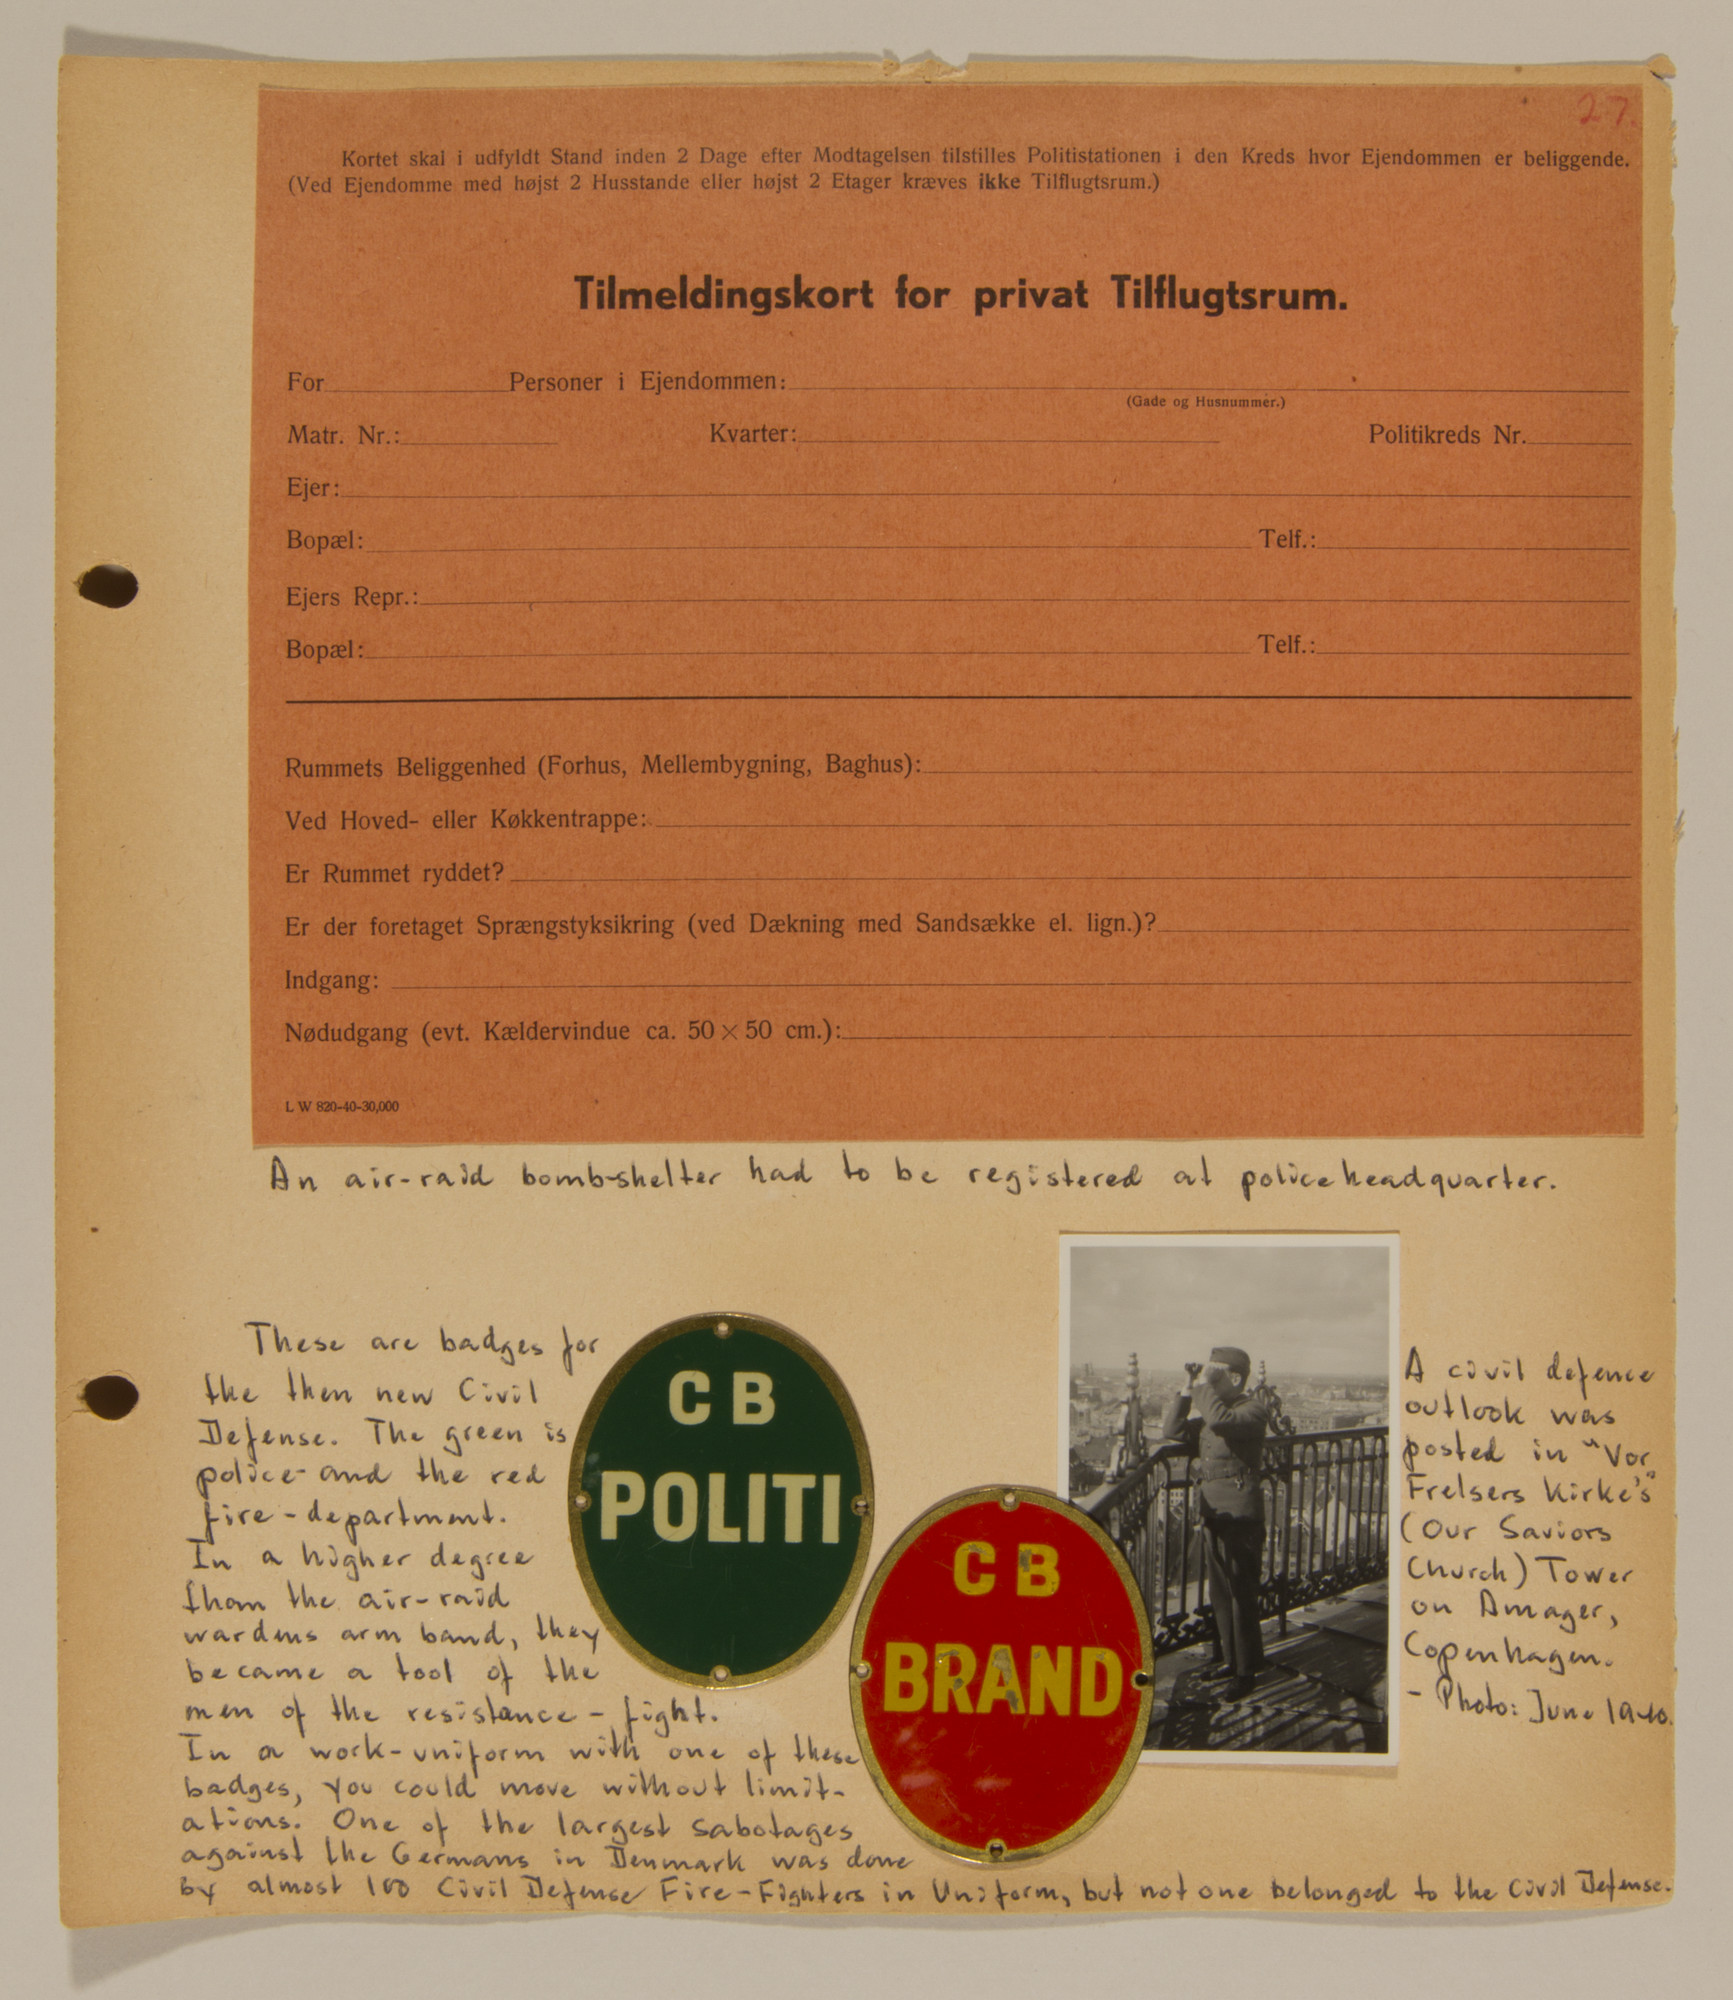 Page from volume one of a set of scrapbooks compiled by Bjorn Sibbern, a Danish policeman and resistance member, documenting the German occupation of Denmark.

This page contains civil defense badges.